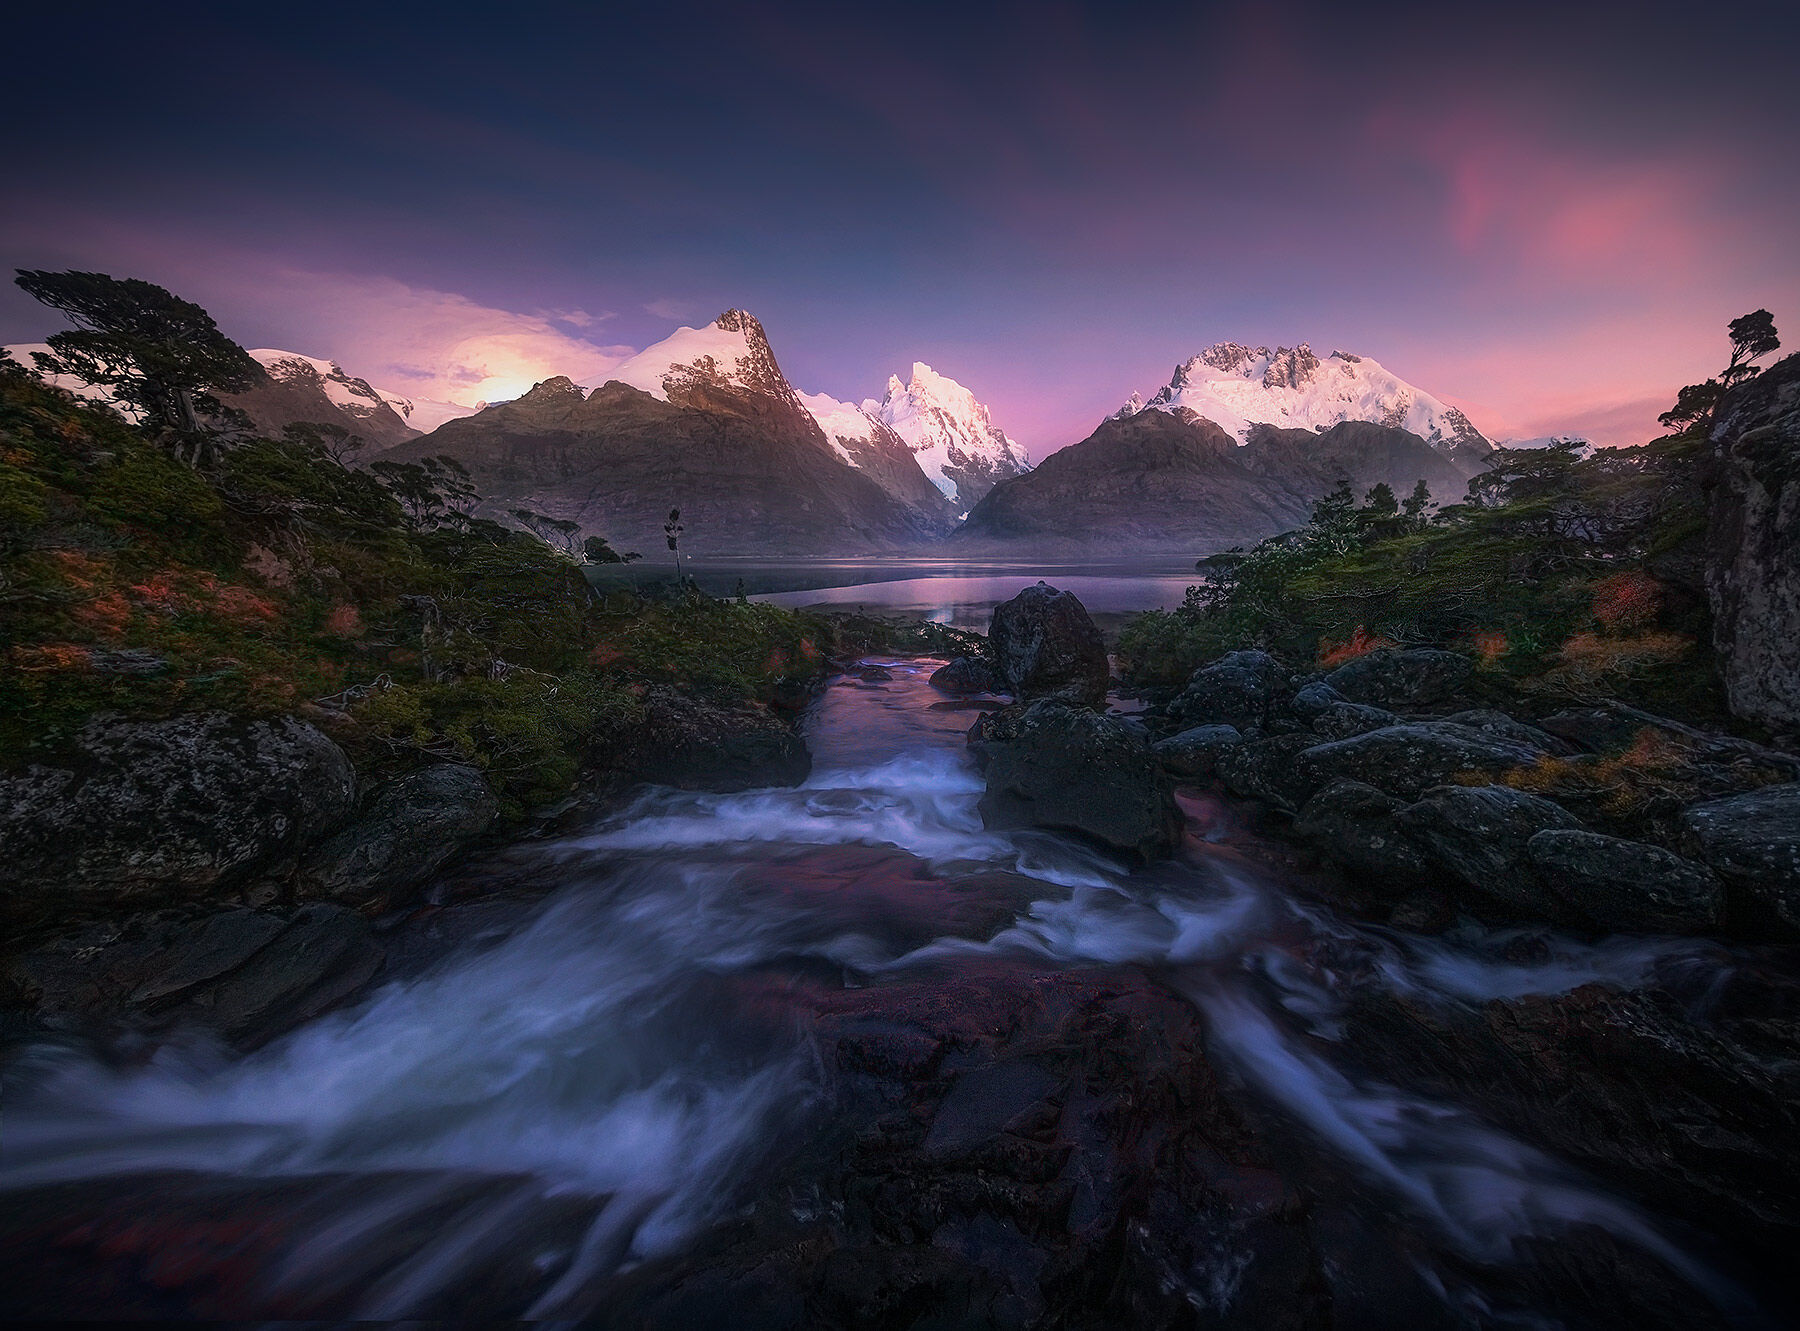 Cascades at twilight as the moon sets over a fjord in Patagonian Chile